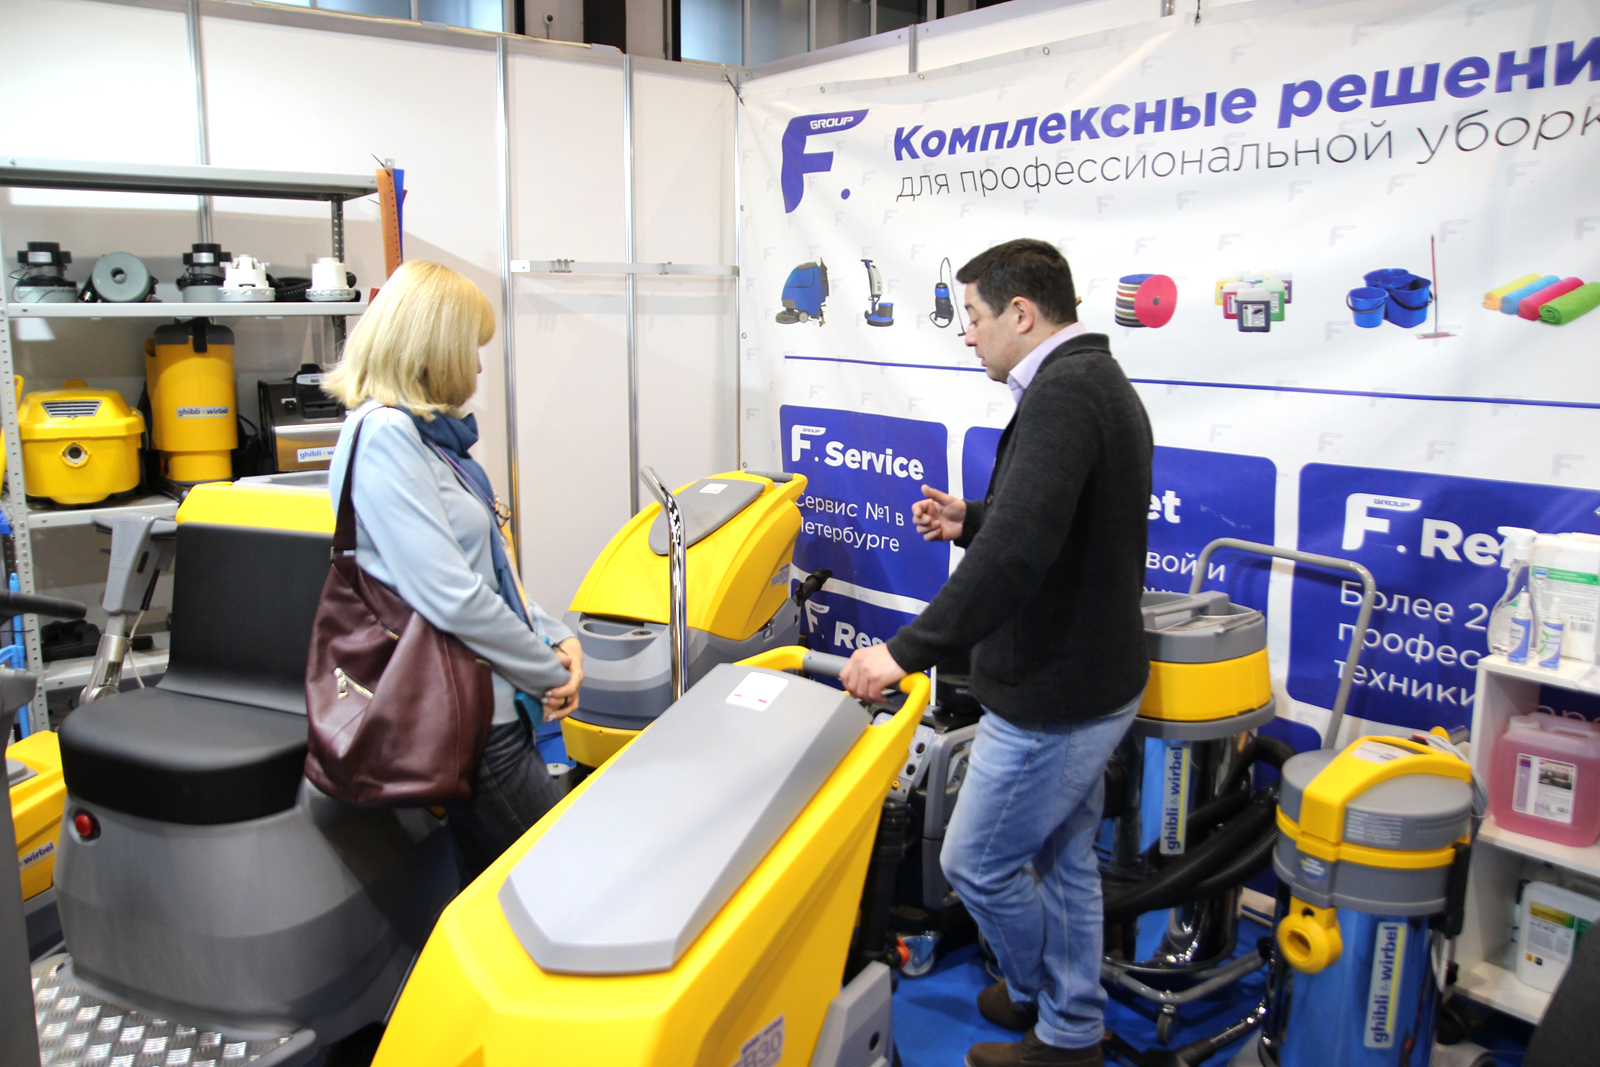 cleanexpo_spb_session-02